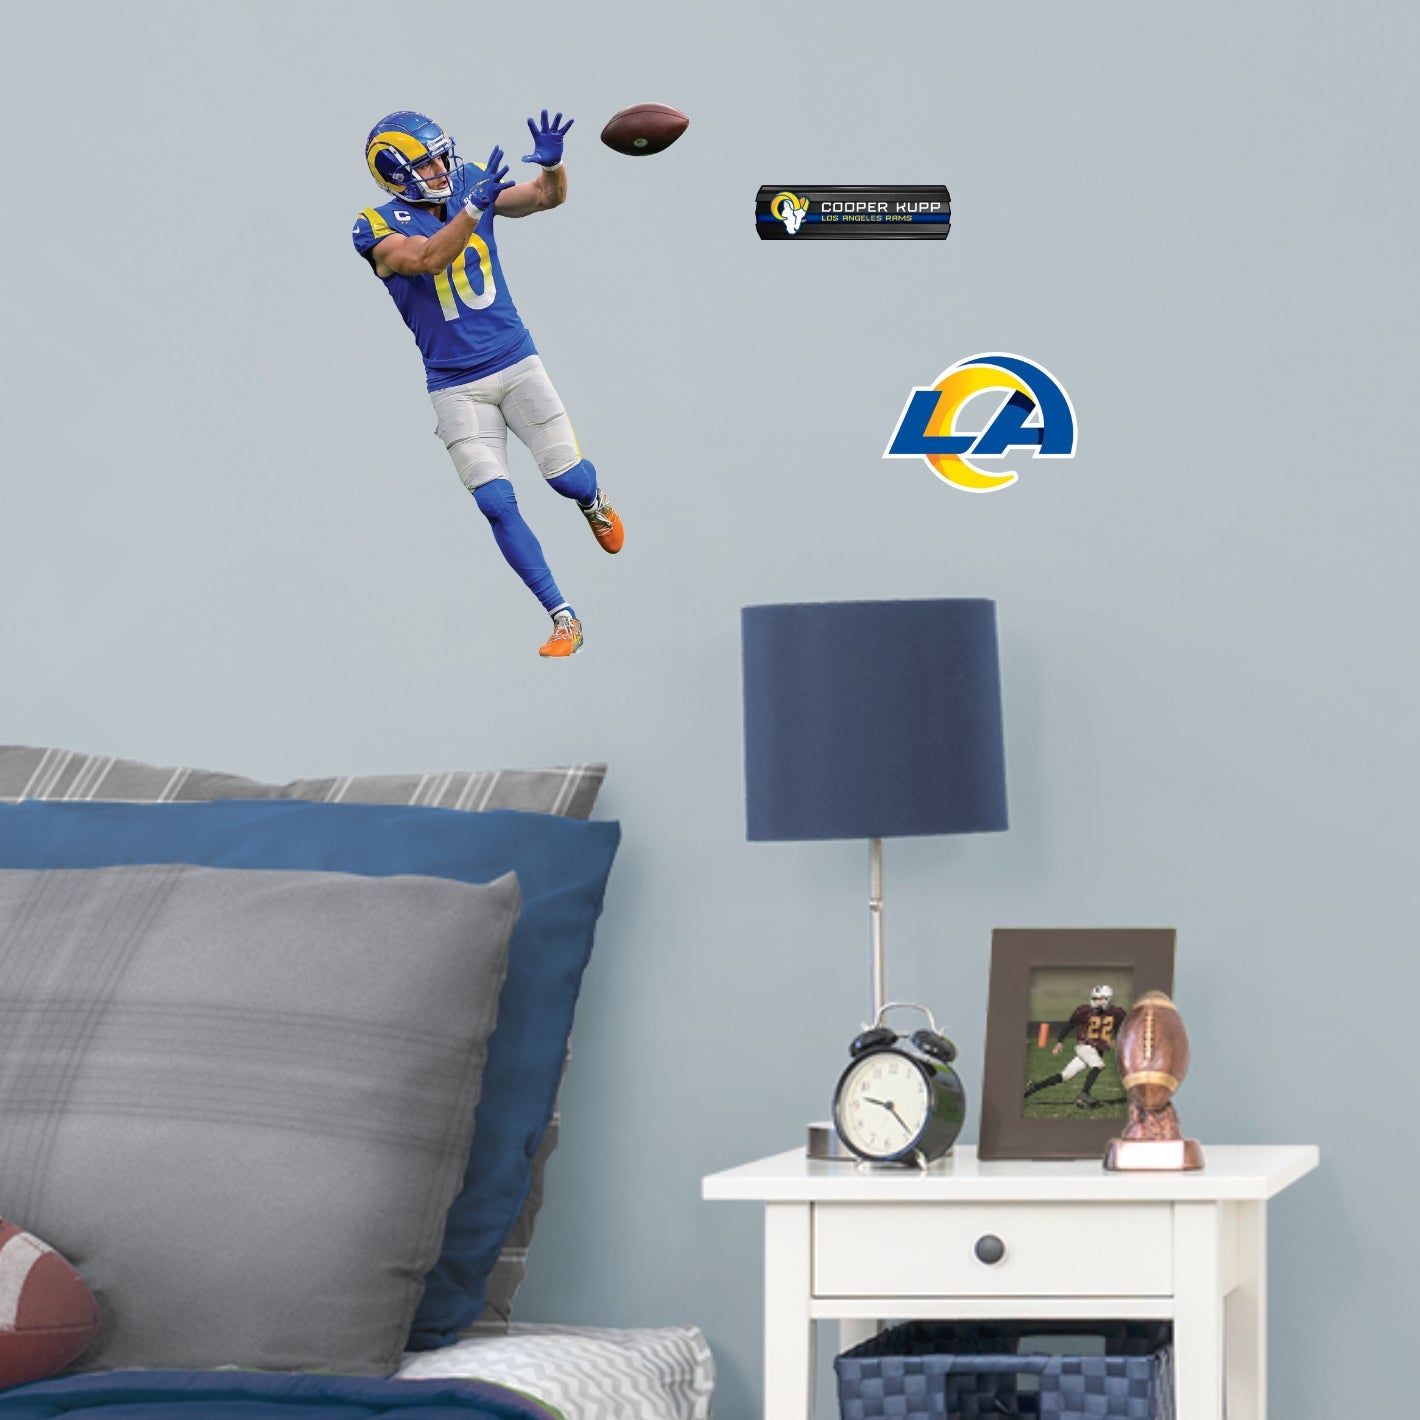 Los Angeles Rams: Cooper Kupp Catch - Officially Licensed NFL Removable Adhesive Decal